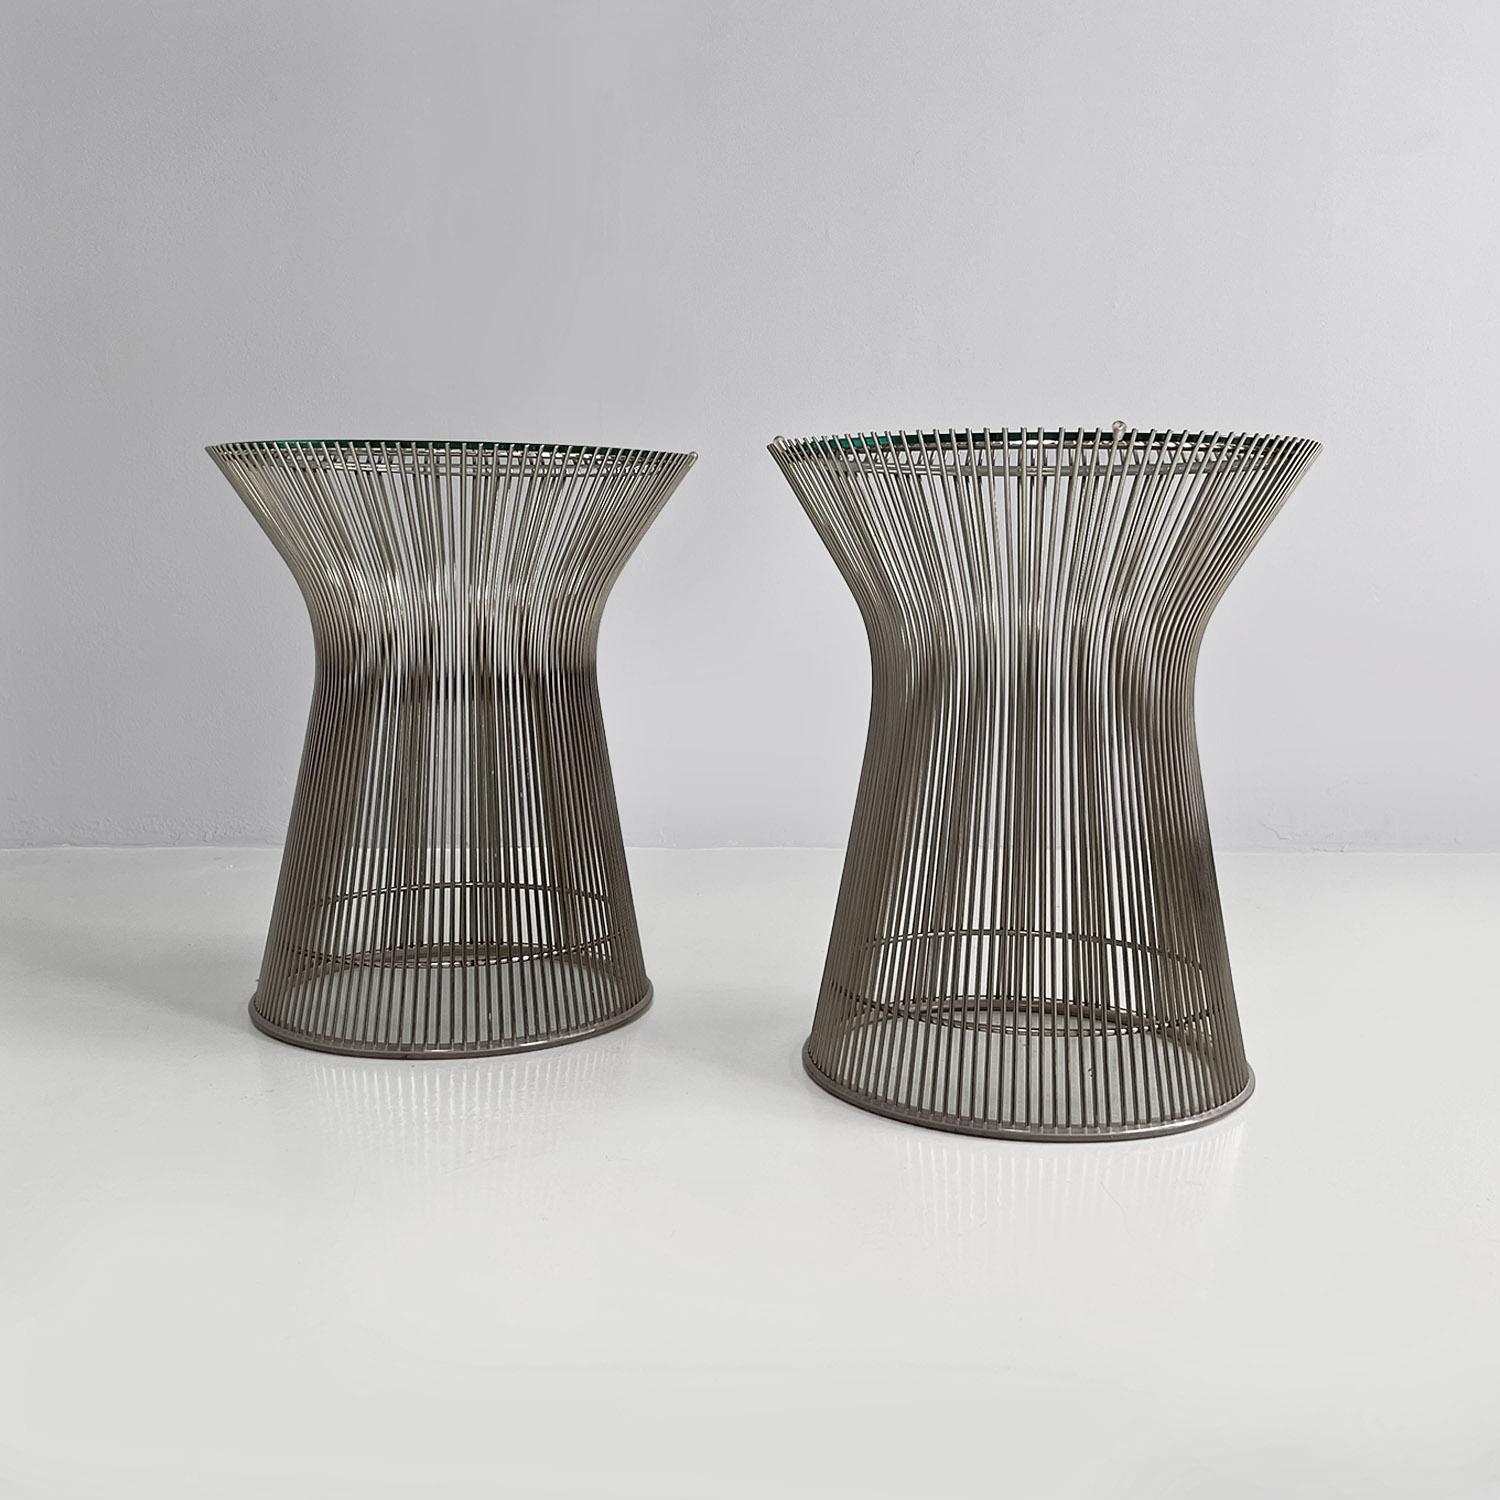 Steel glass coffee tables, pair 39.5x46.5 cm 976 each.
Pair of round tables, with a structure made up of thin chromed metal bars, welded to a horizontal metal rod placed in the lower part and one in the upper part, which act both as a load-bearing